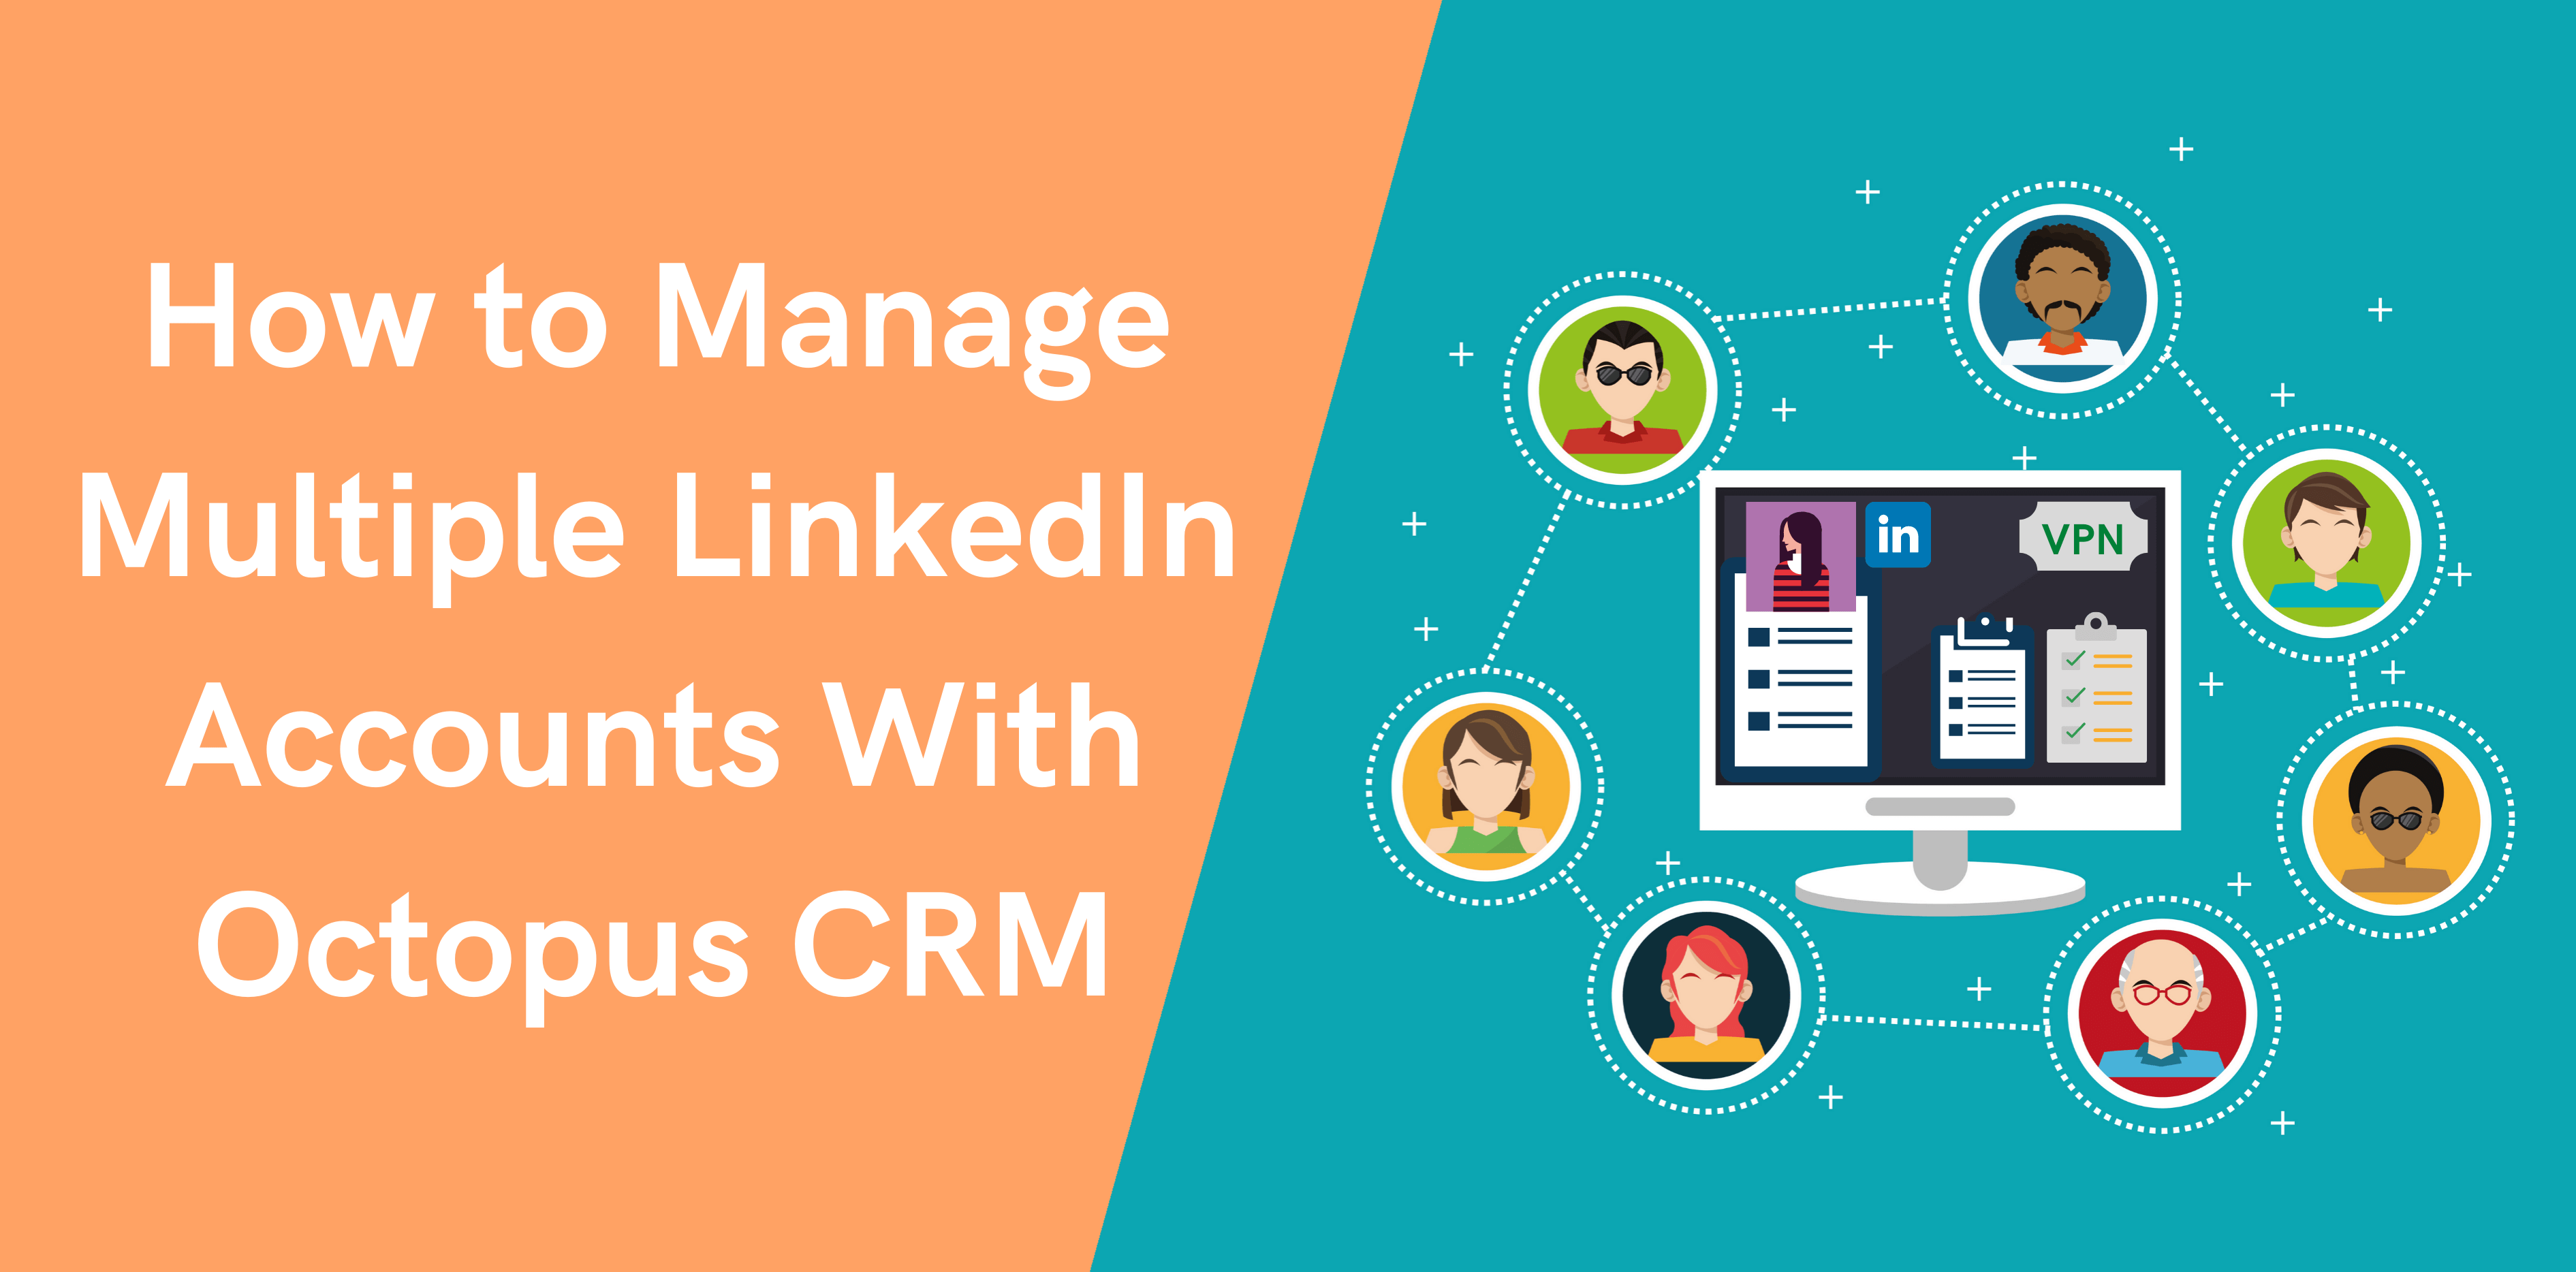 Thumbnail-How-to-Manage-Multiple-LinkedIn-Accounts-With-Octopus-CRM